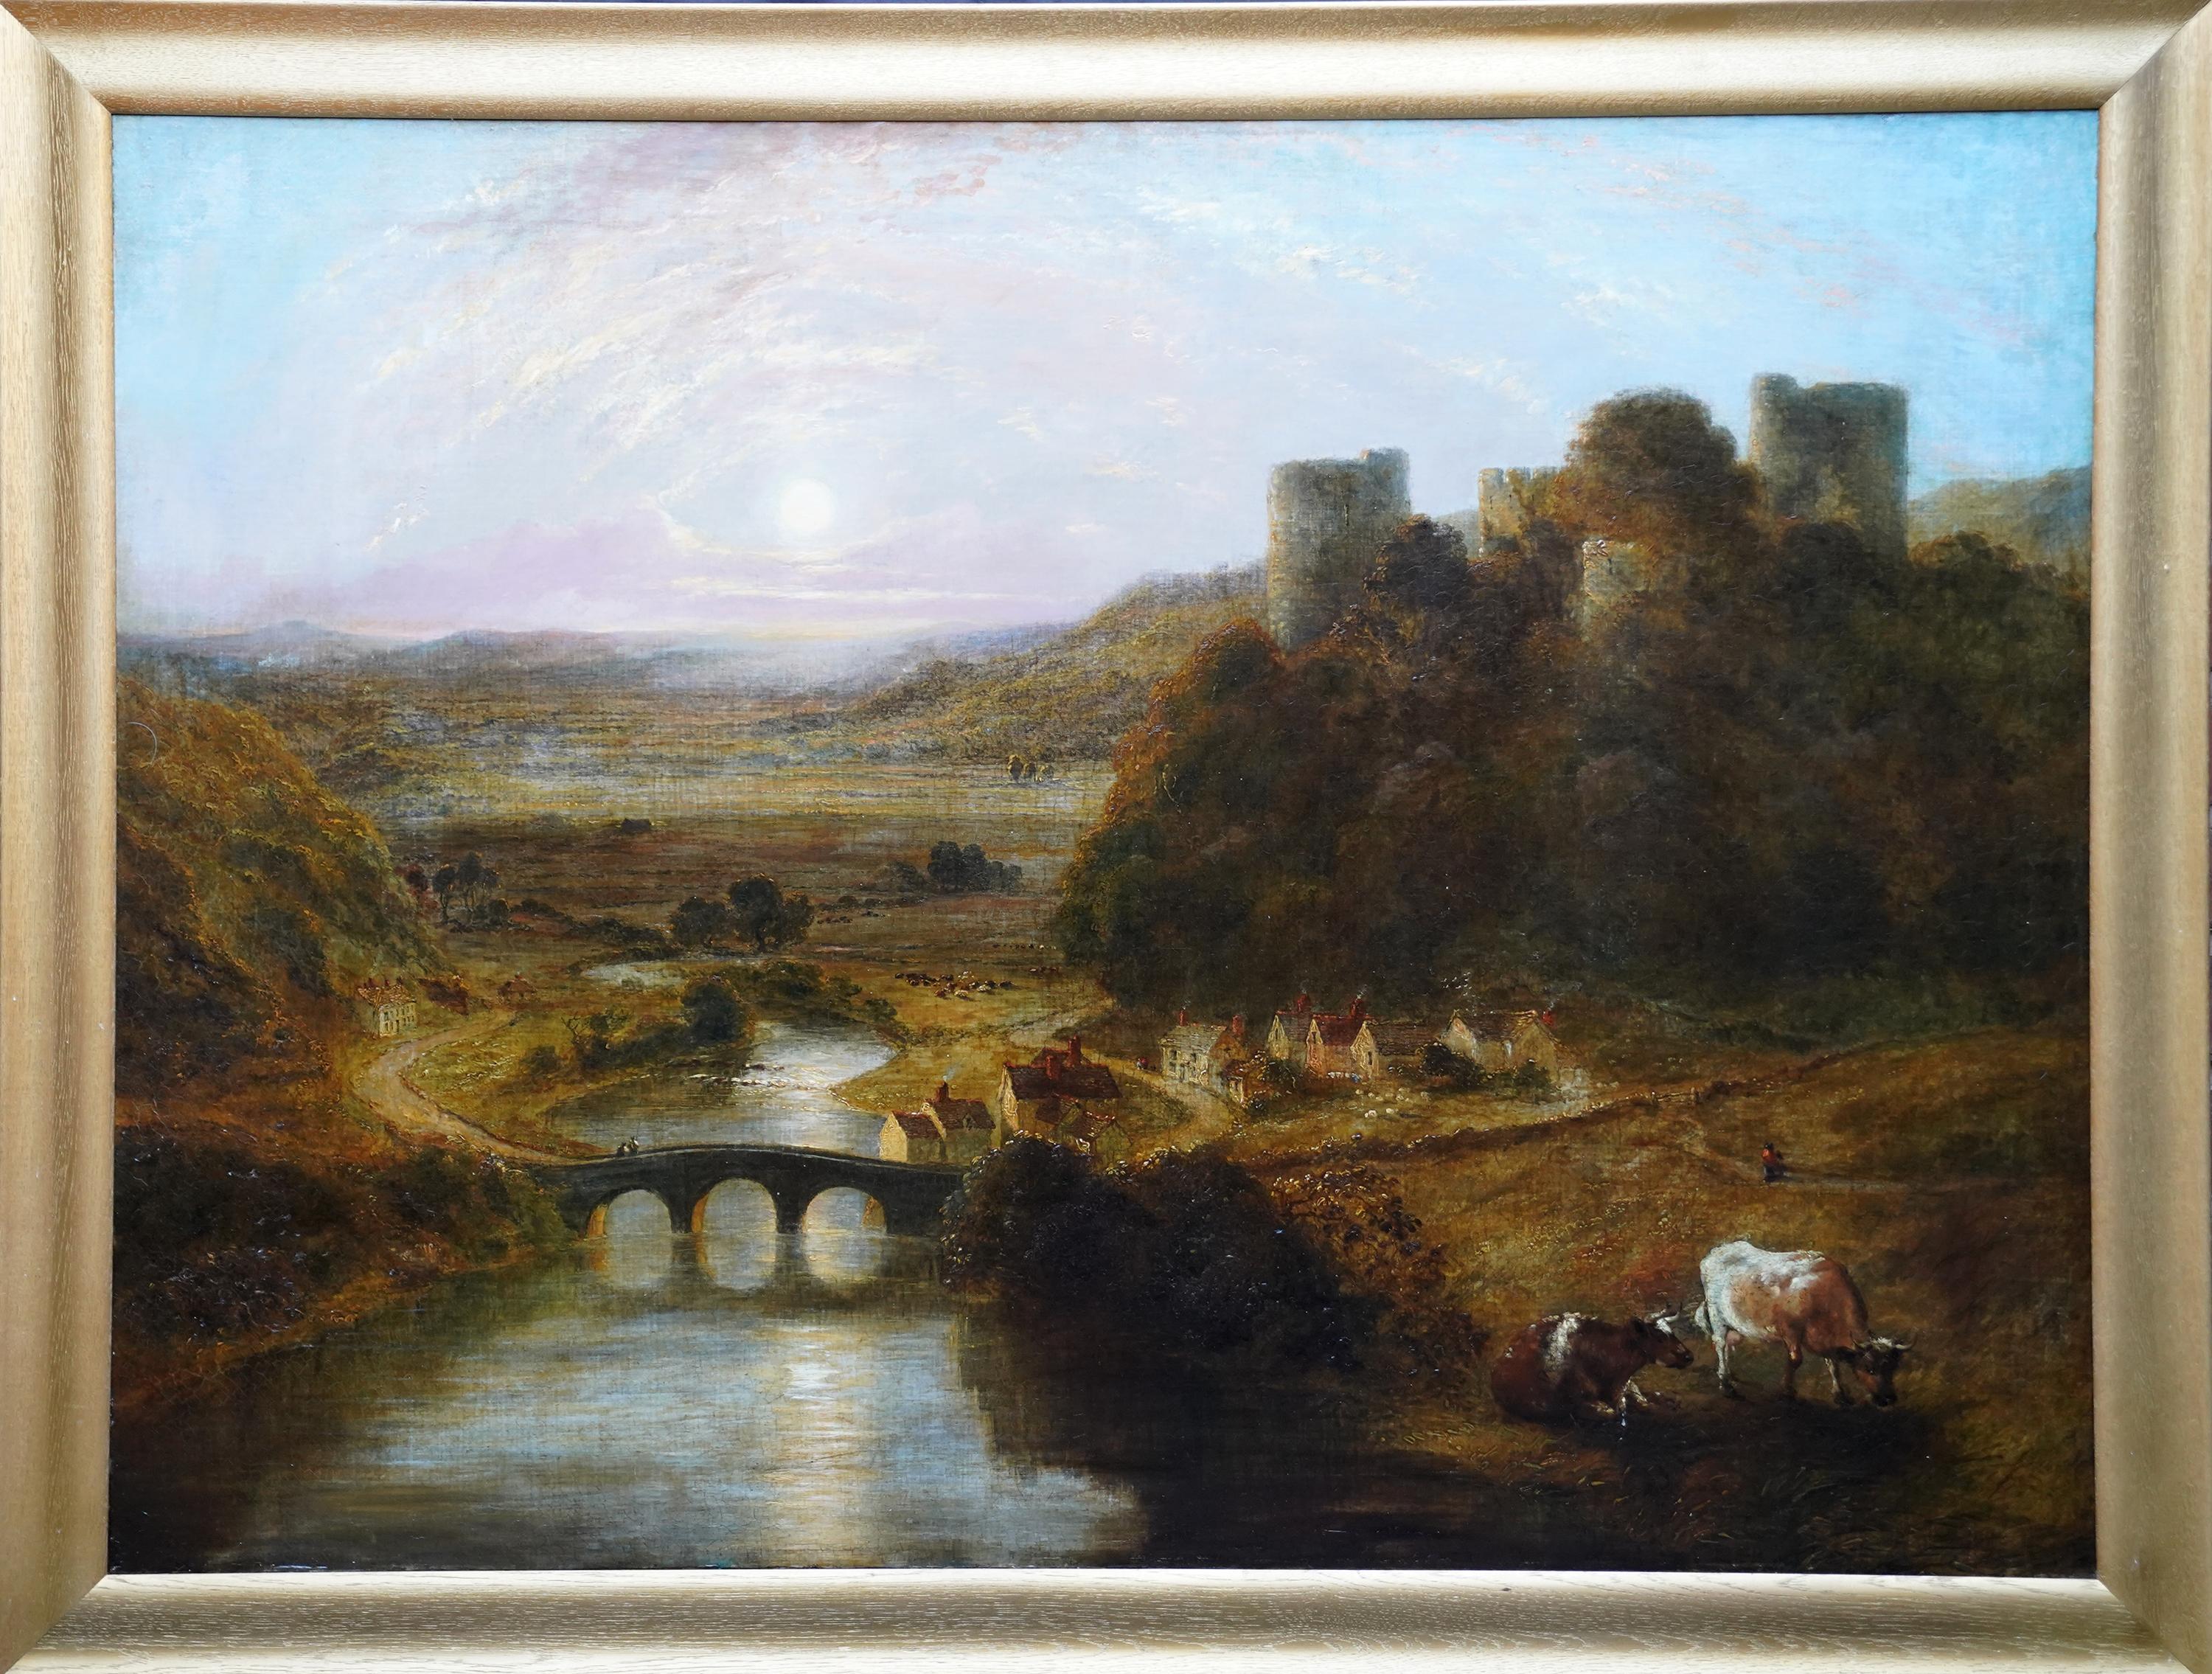 George Mote Landscape Painting - Castle and River Landscape - British 19thC art oil painting follower of Turner